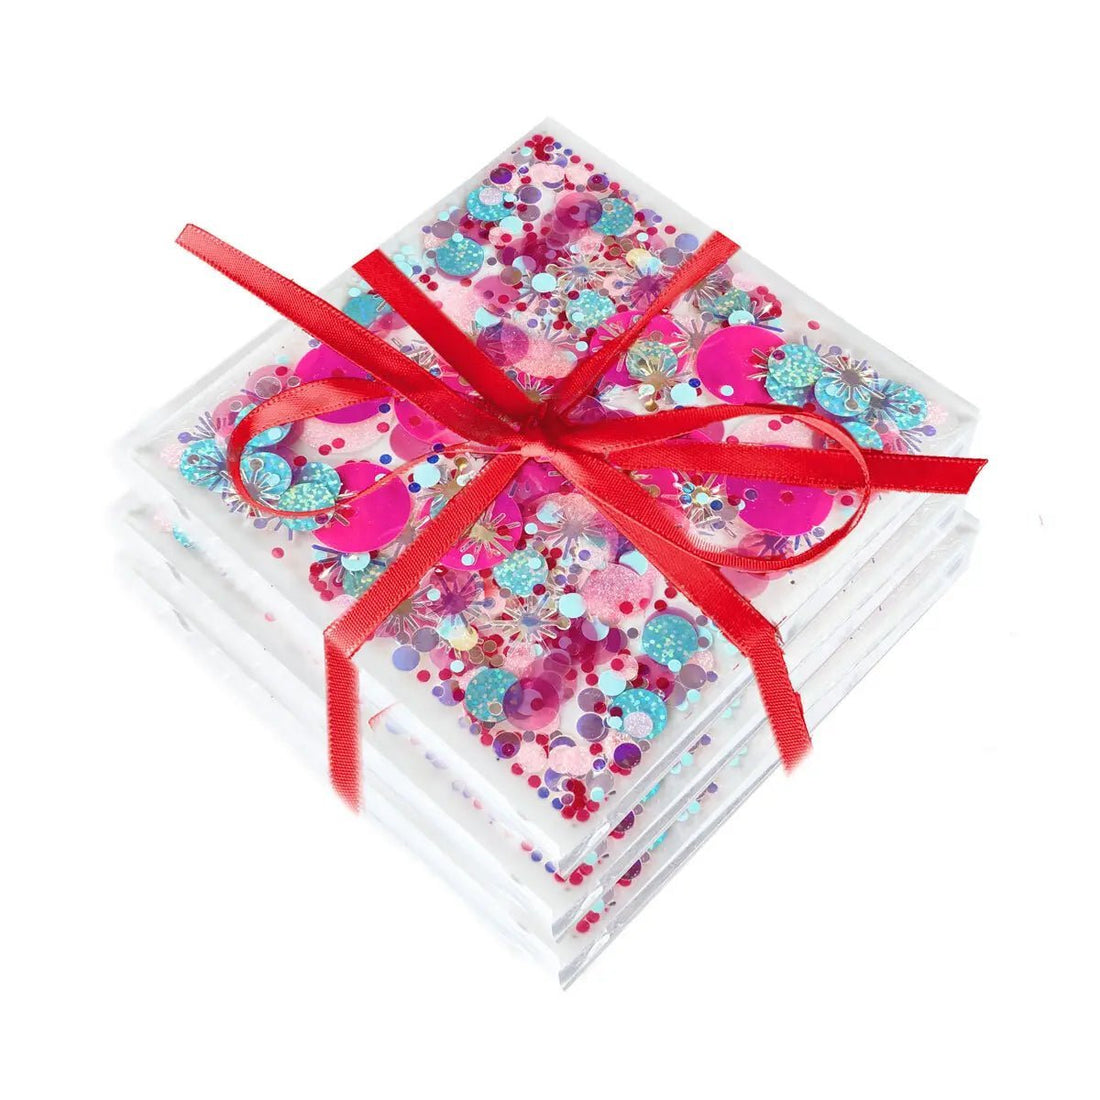 Shop Packed Party Think Pink Confetti Drink Coasters - Premium Coasters from Packed Party Online now at Spoiled Brat 